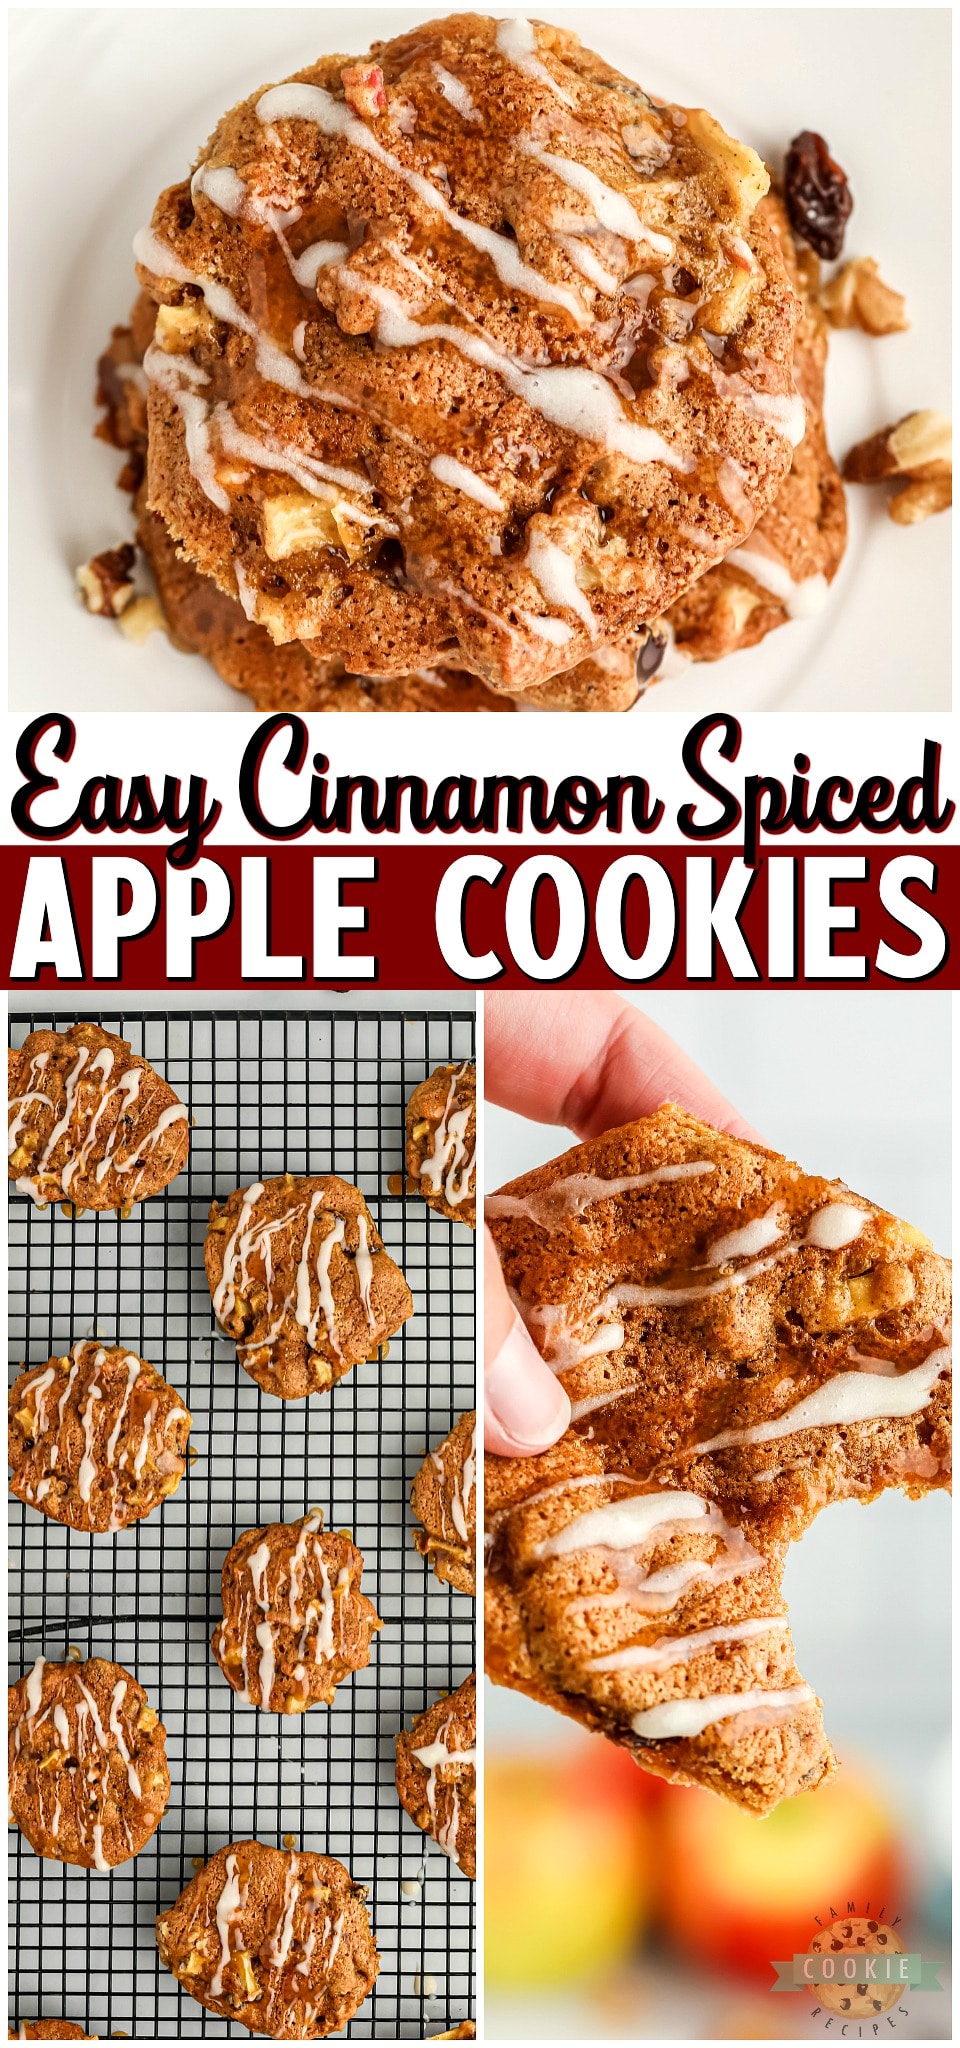 Apple Spice Cookies are soft & chewy cookies packed with fresh apples & fall spices! With chopped apples, walnuts, and a simple powdered sugar glaze on top, these cookies are hard to resist! #apples #cookies #cinnamon #Fall #baking #dessert #recipe from FAMILY COOKIE RECIPES via @buttergirls